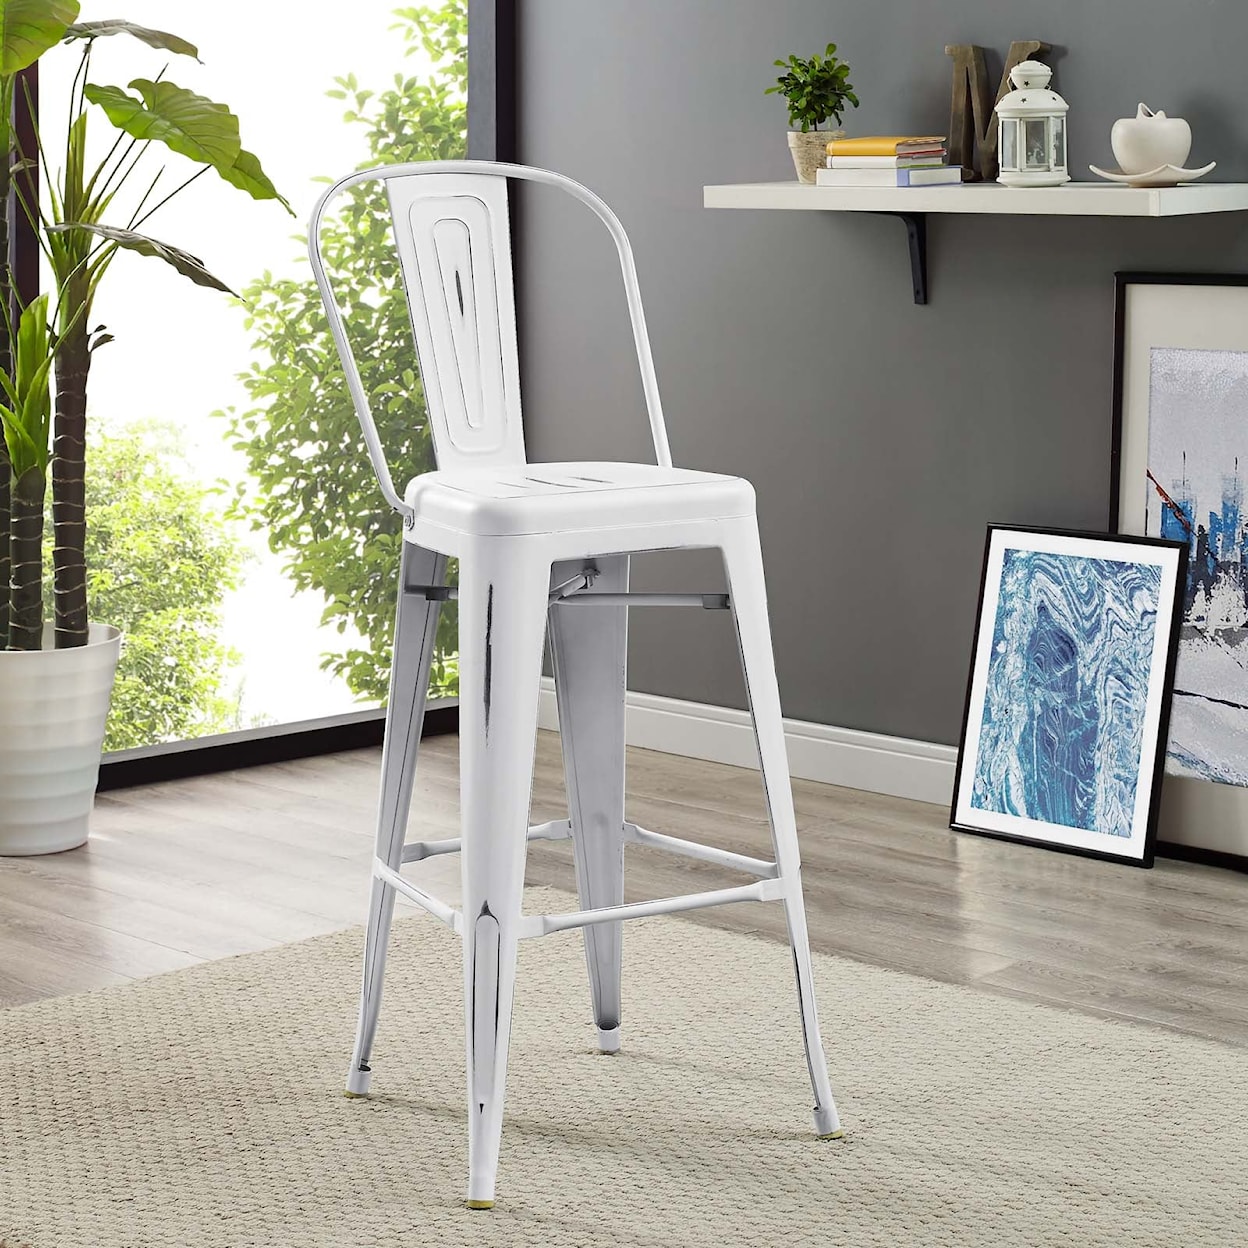 Modway Promenade Cafe and Bistro Style Bar Stool